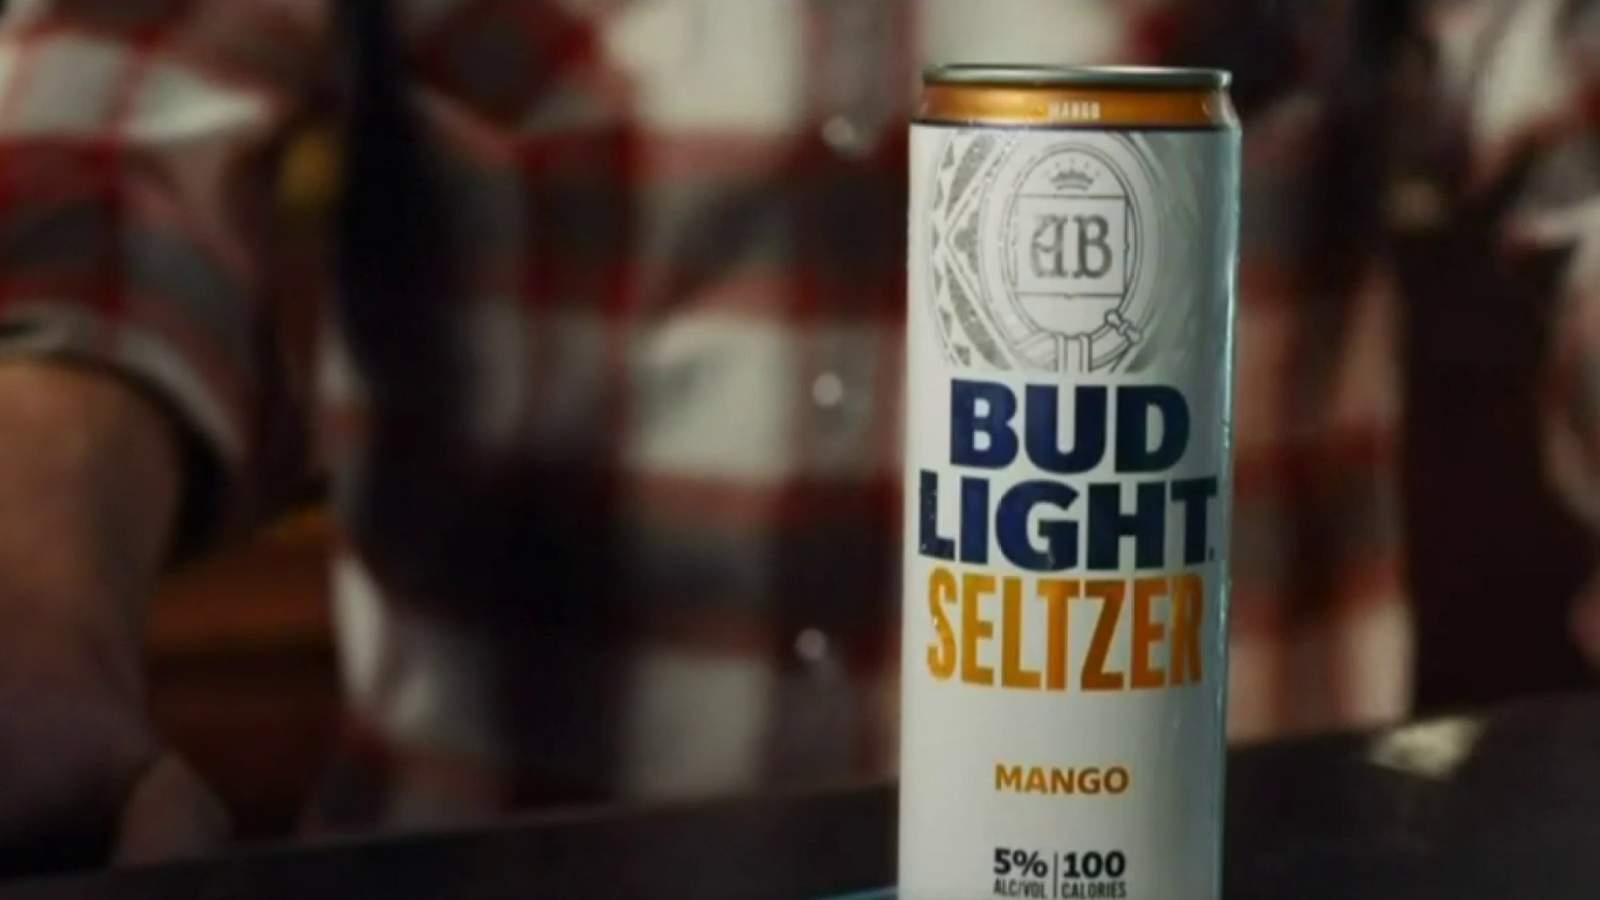 Bud Light Seltzer will pay you $5,000 a month to create memes